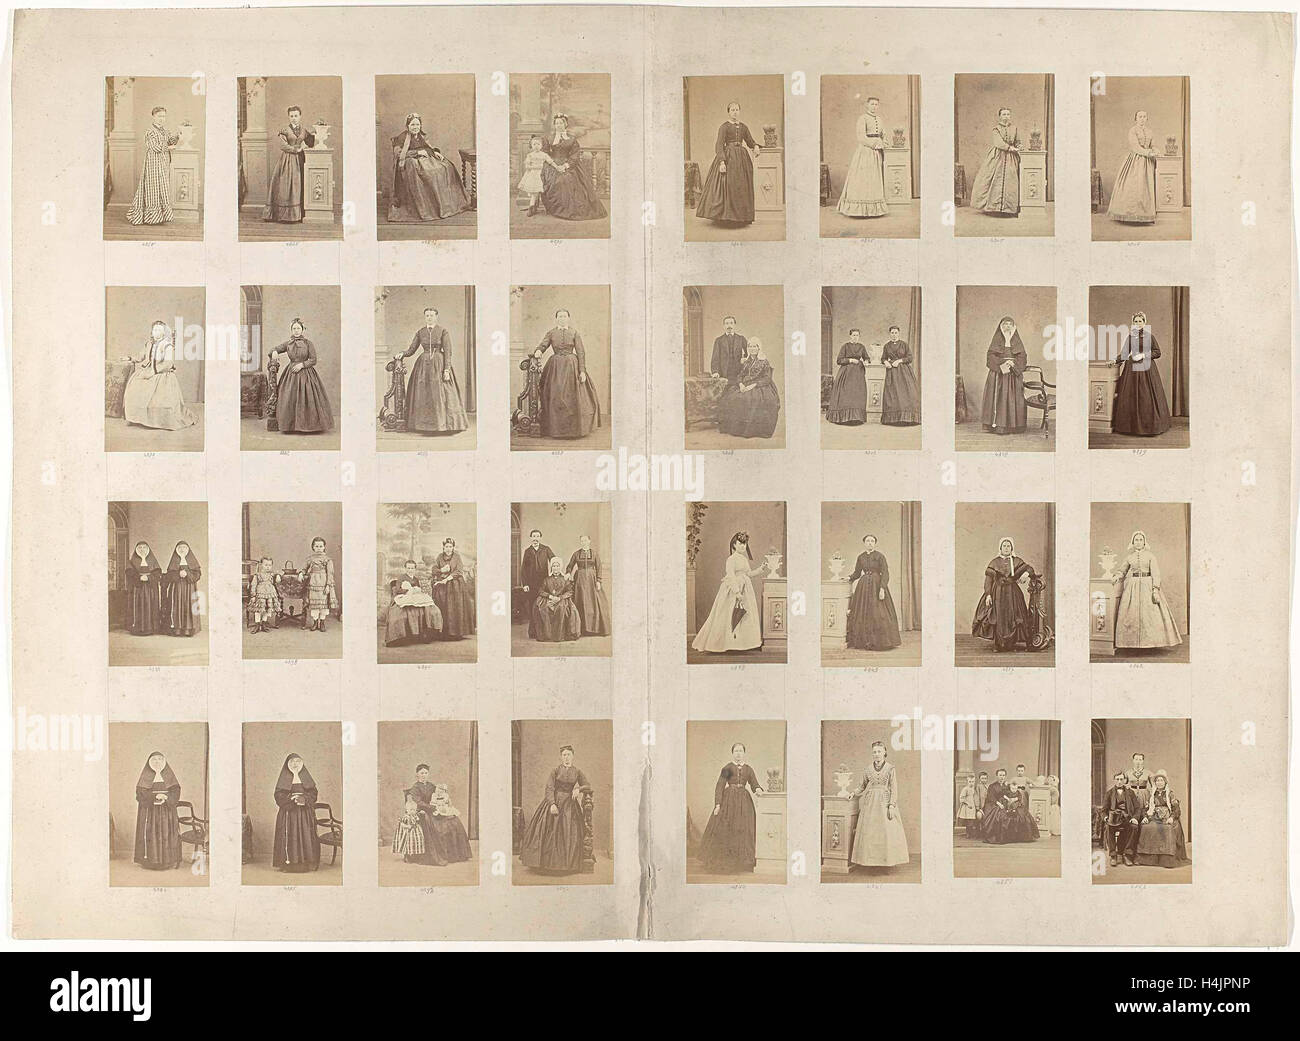 Journal 32 cartes-de-visite of inventory from an unknown portrait photographer, Anonymous, c. 1860 - c. 1870 Stock Photo